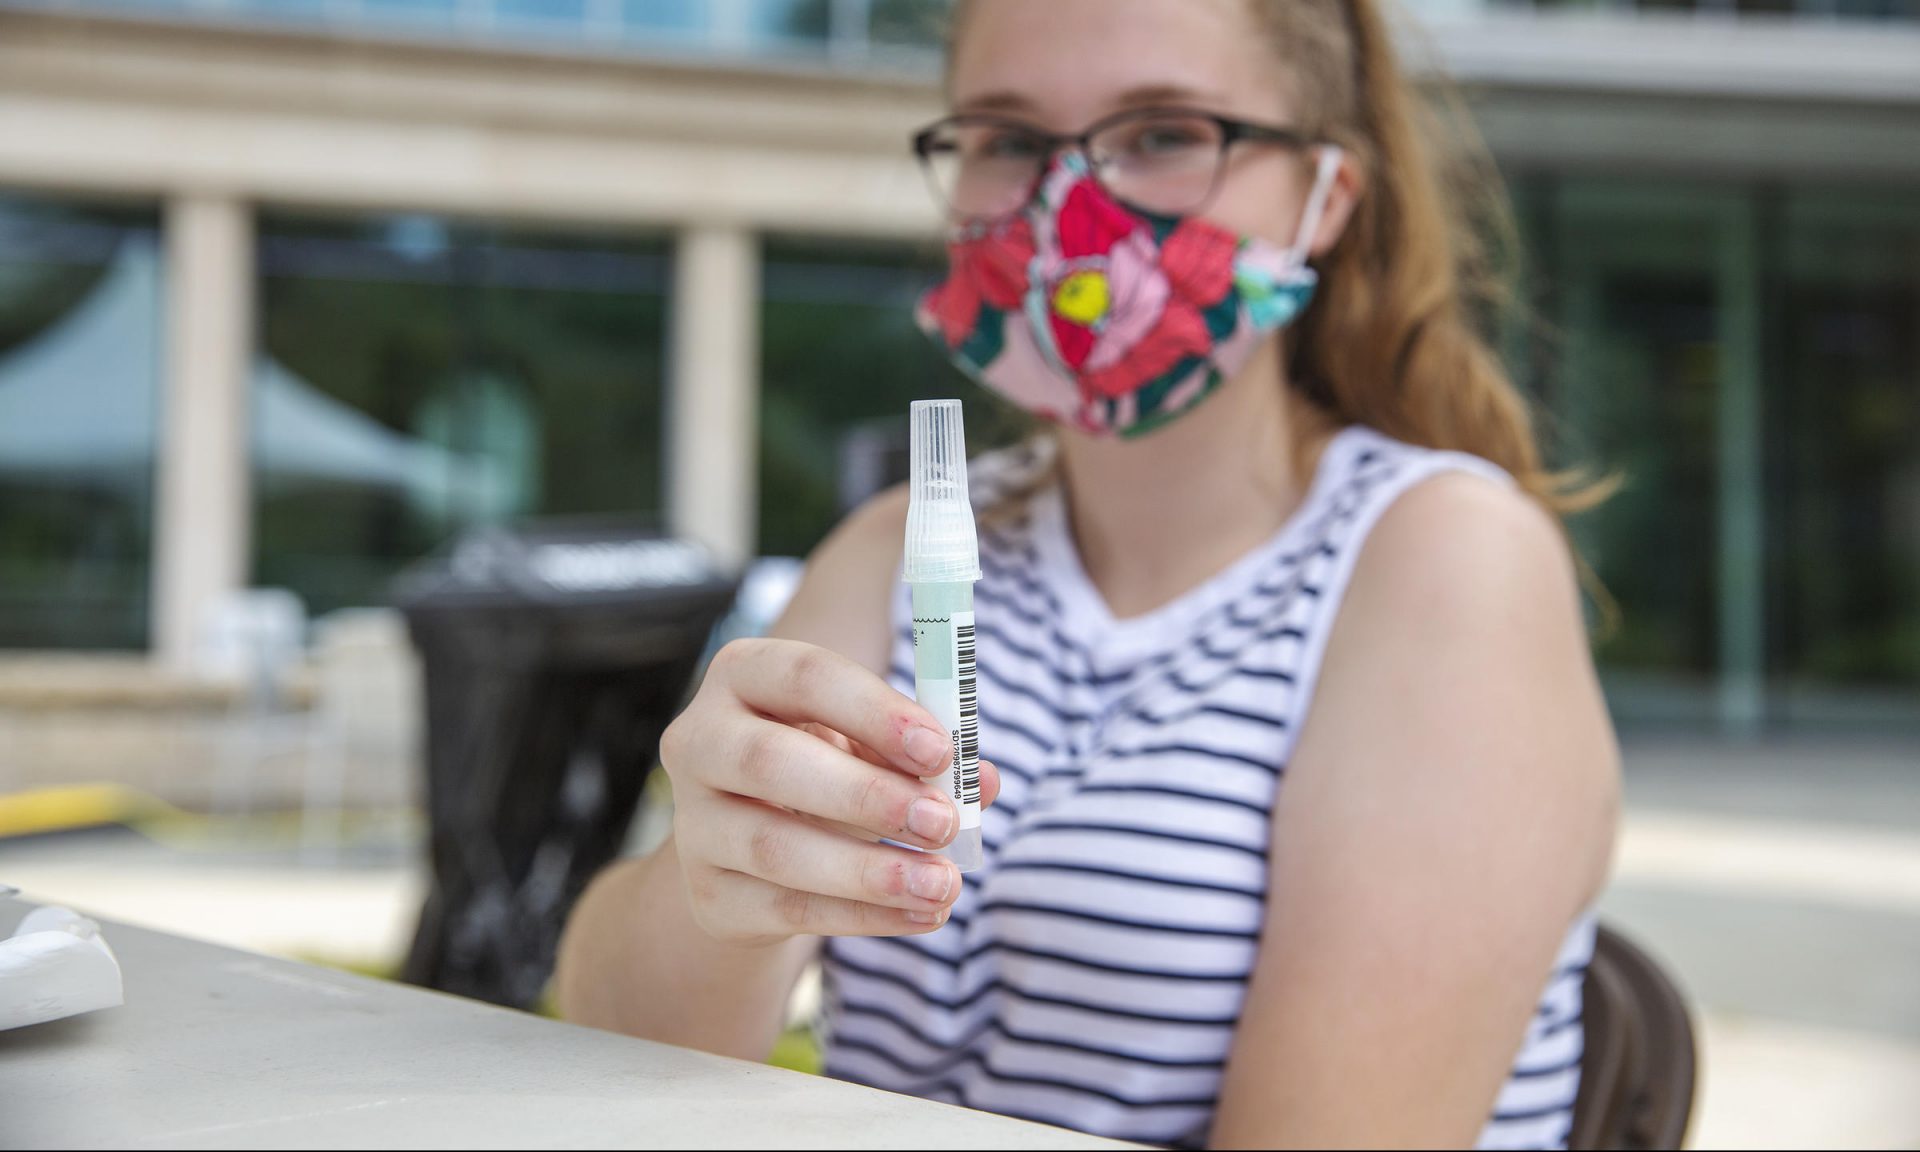 In this file photo, Penn State student Kaitlyn Harris did an asymptomatic saliva test at a mobile testing site in August 2020.